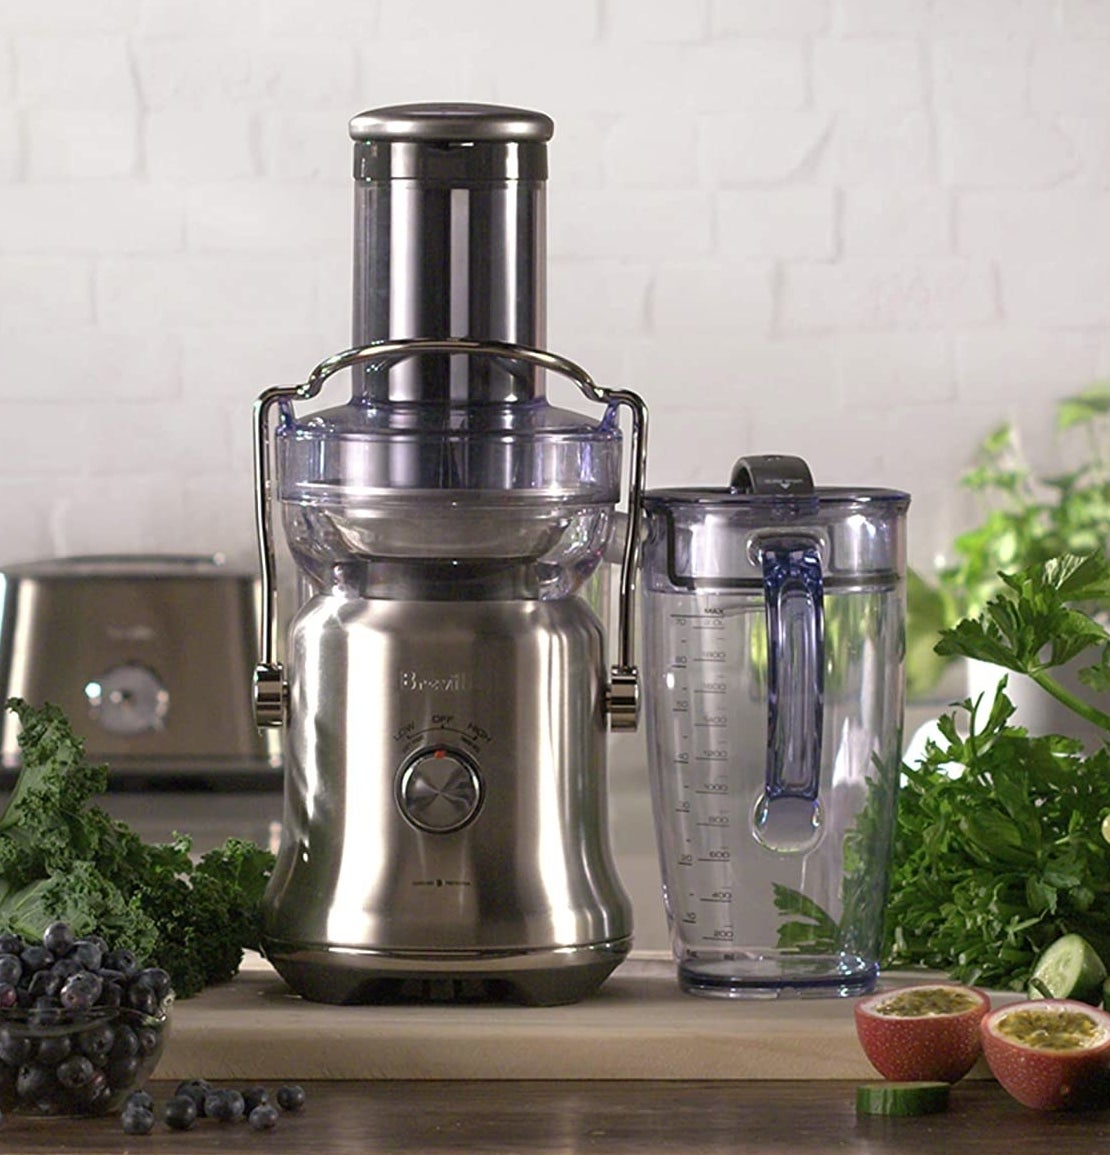 The juicer on a counter on a counter surrounded by fruits and veggies